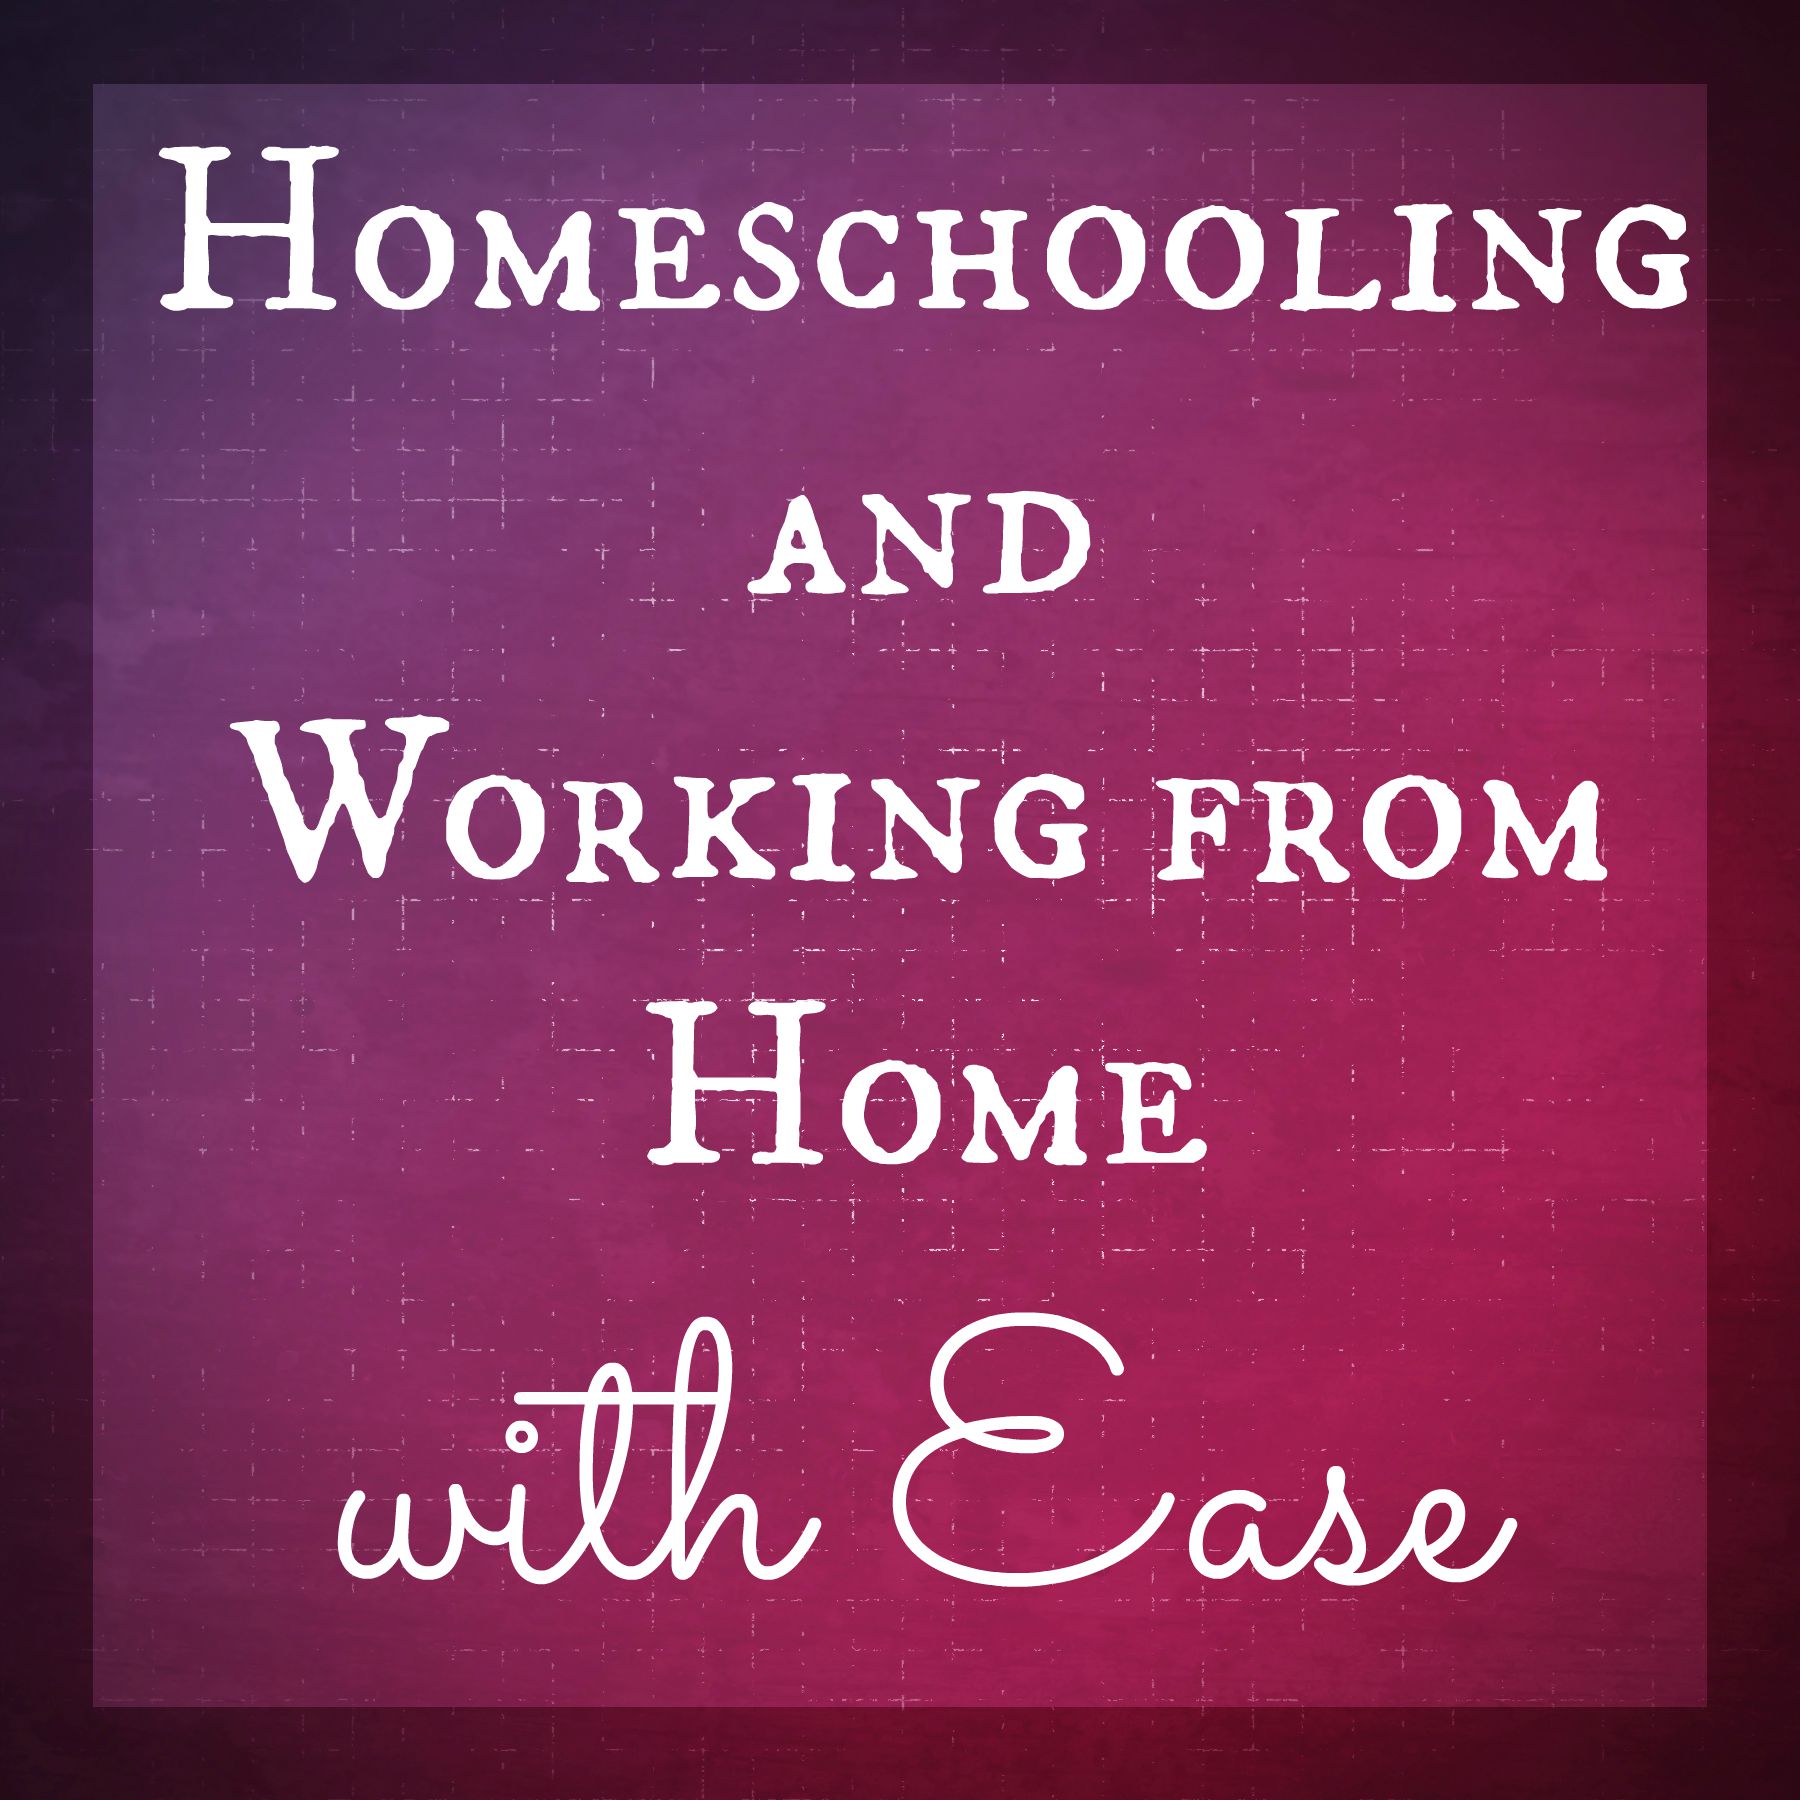 Homeschooling and Working from Home with Ease